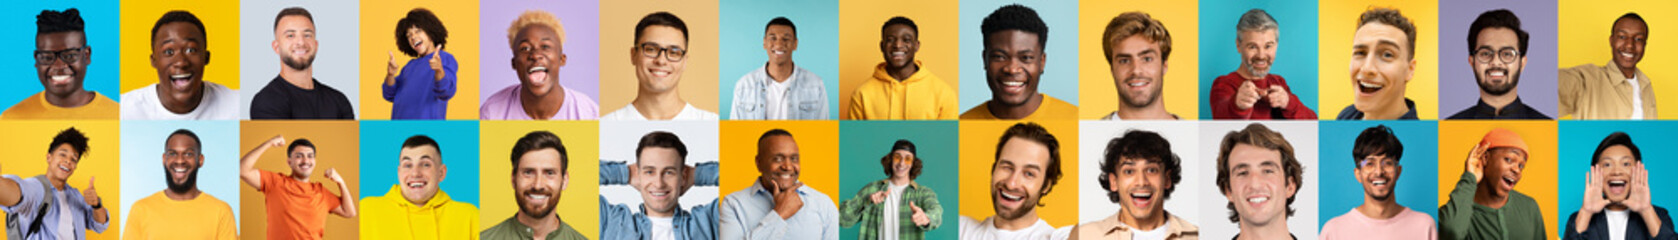 An international, multiracial, and multiethnic array of smiling men faces, captured in a lively...